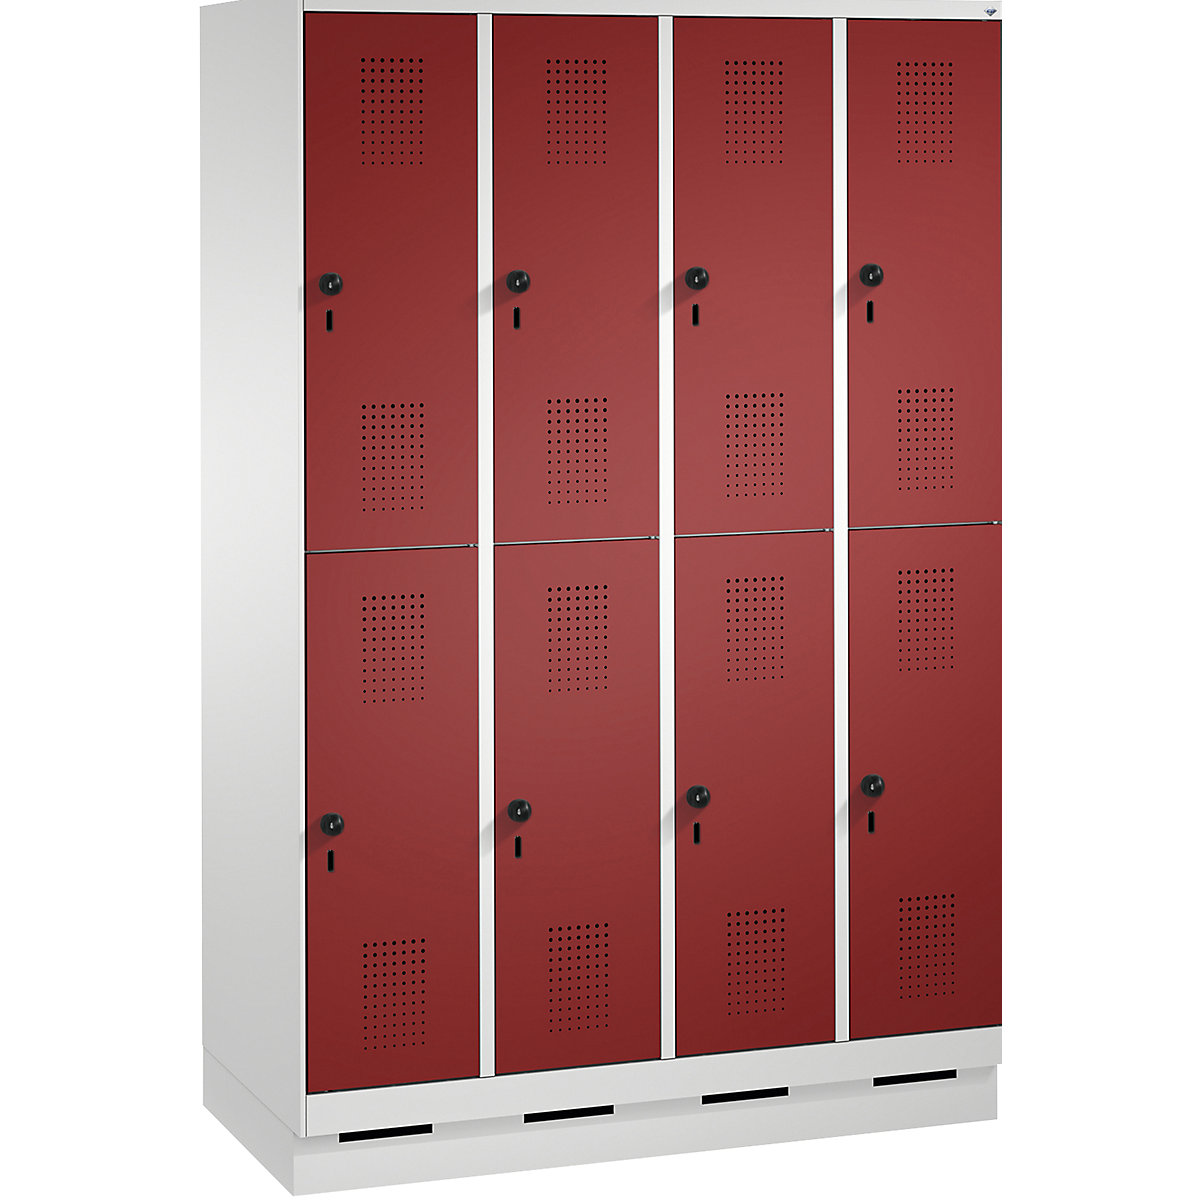 EVOLO cloakroom locker, double tier, with plinth – C+P, 4 compartments, 2 shelf compartments each, compartment width 300 mm, light grey / ruby red-4